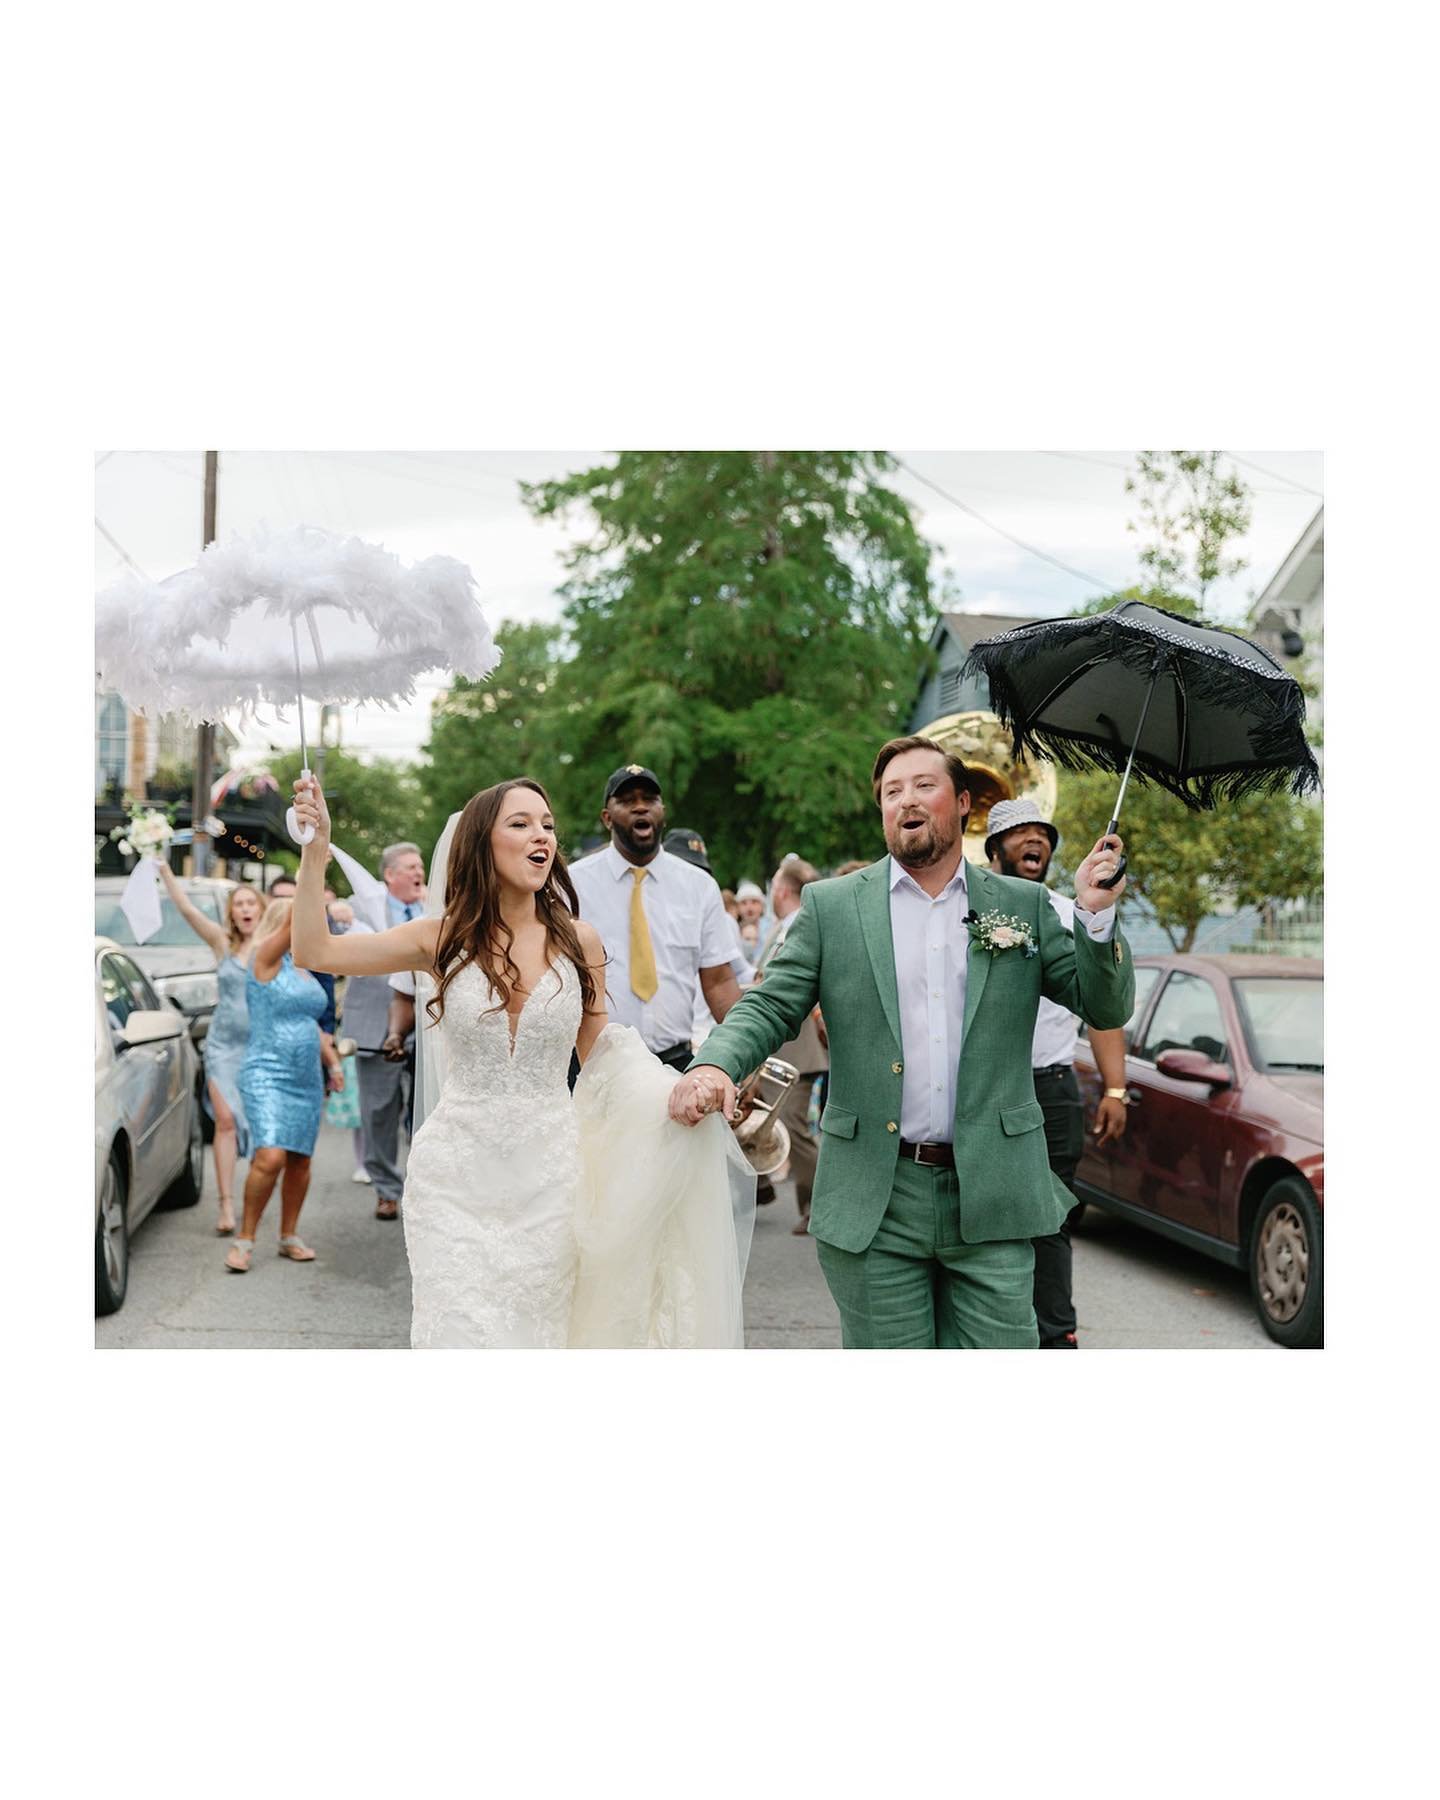 Ivy &amp; Tyler&rsquo;s spring wedding at the Royal Frenchmen Hotel has me feeling some type of way 💕🥹✨